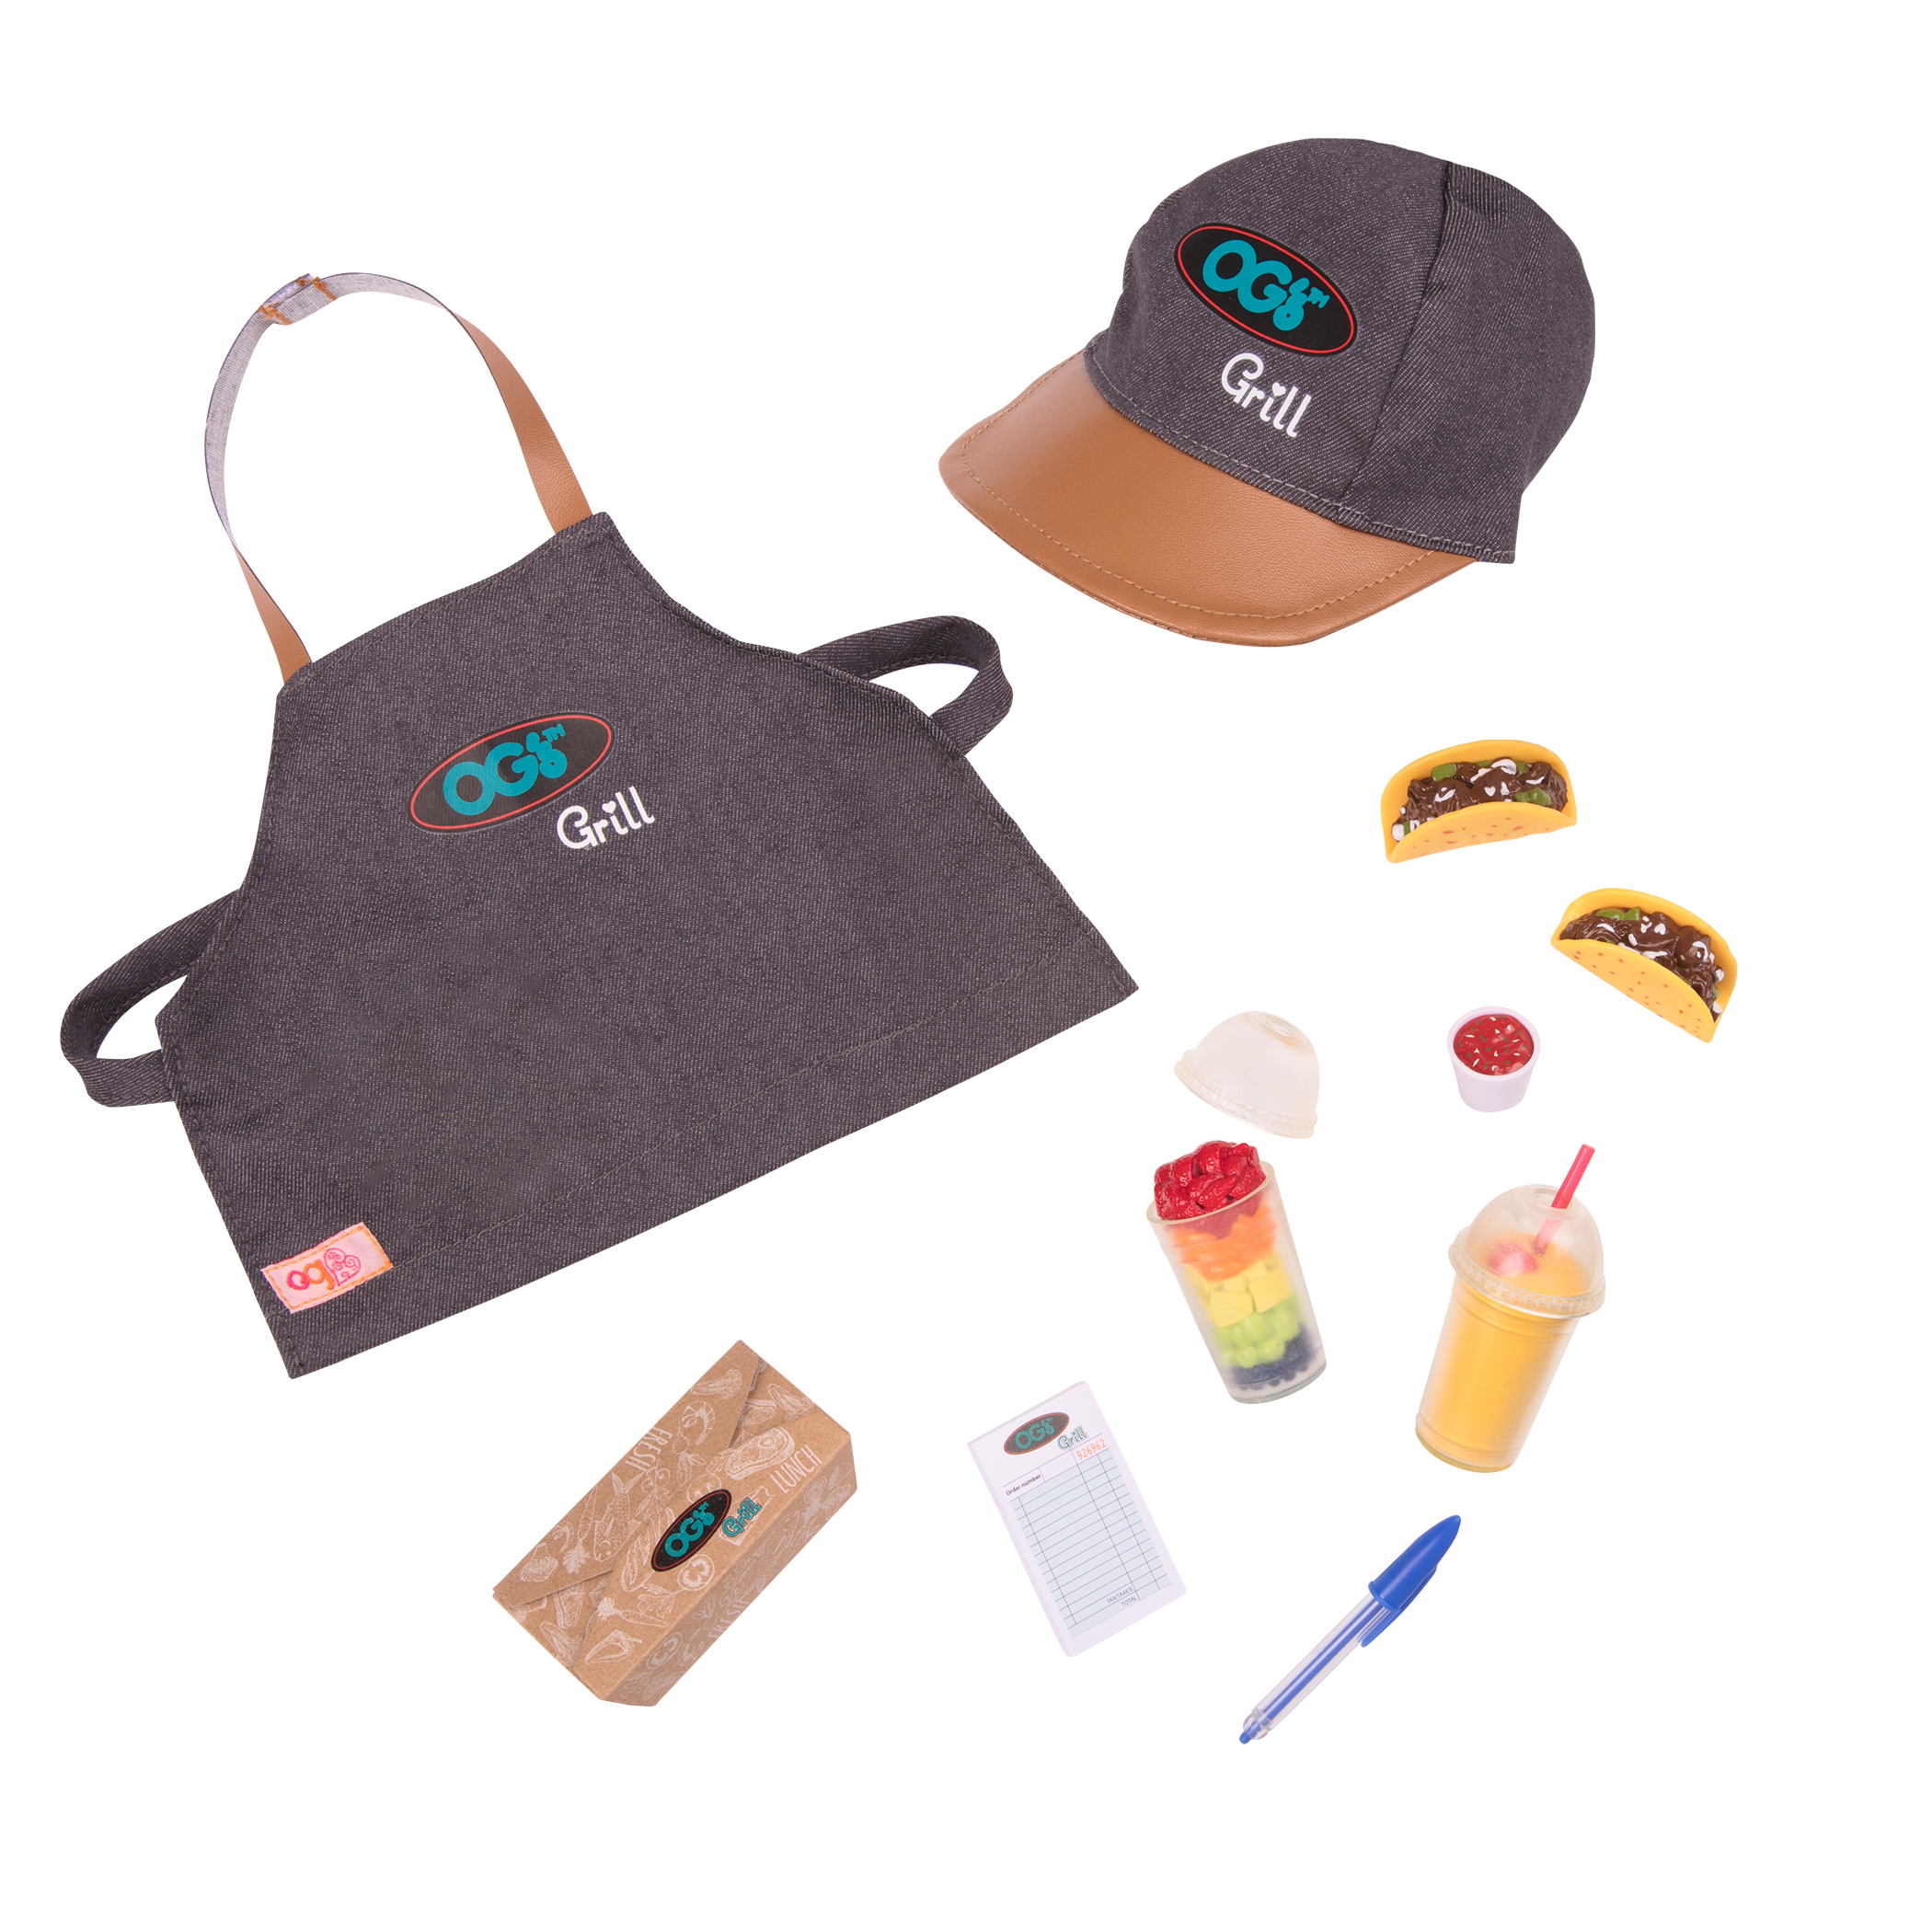 Detail of Food Truck outfit and accessories